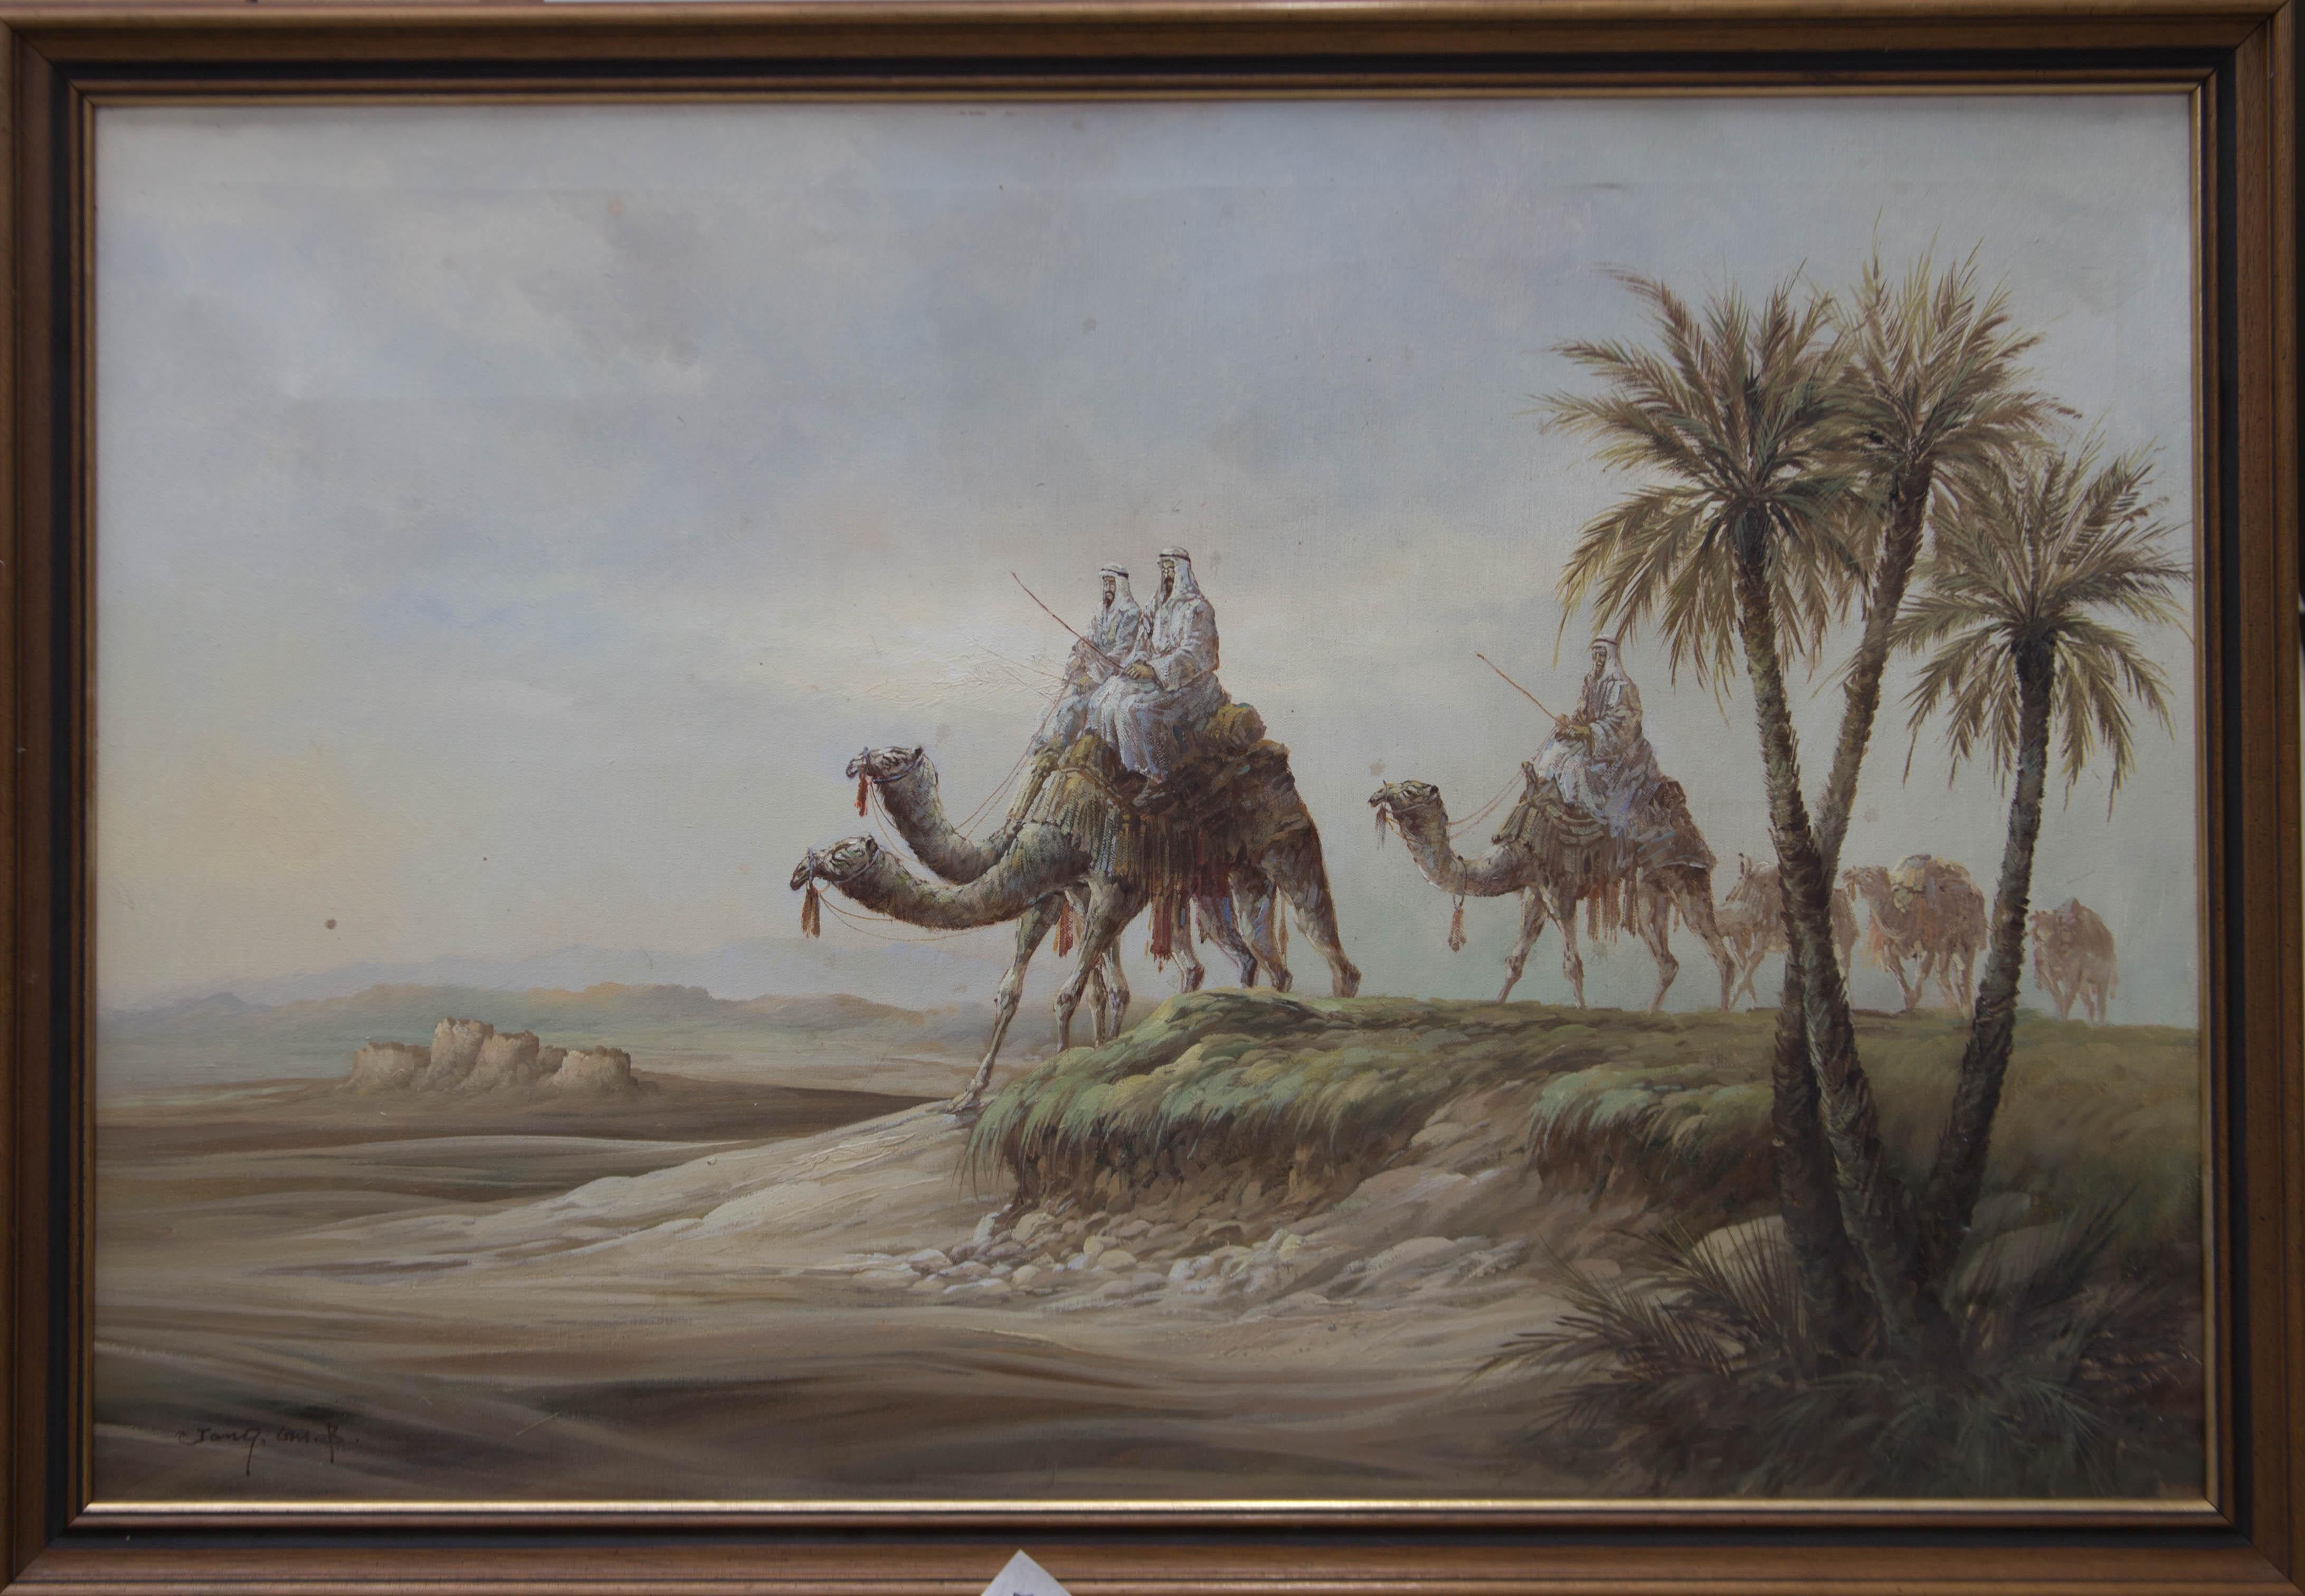 Unknown Landscape Painting - 20th Century Acrylic - Camel Train